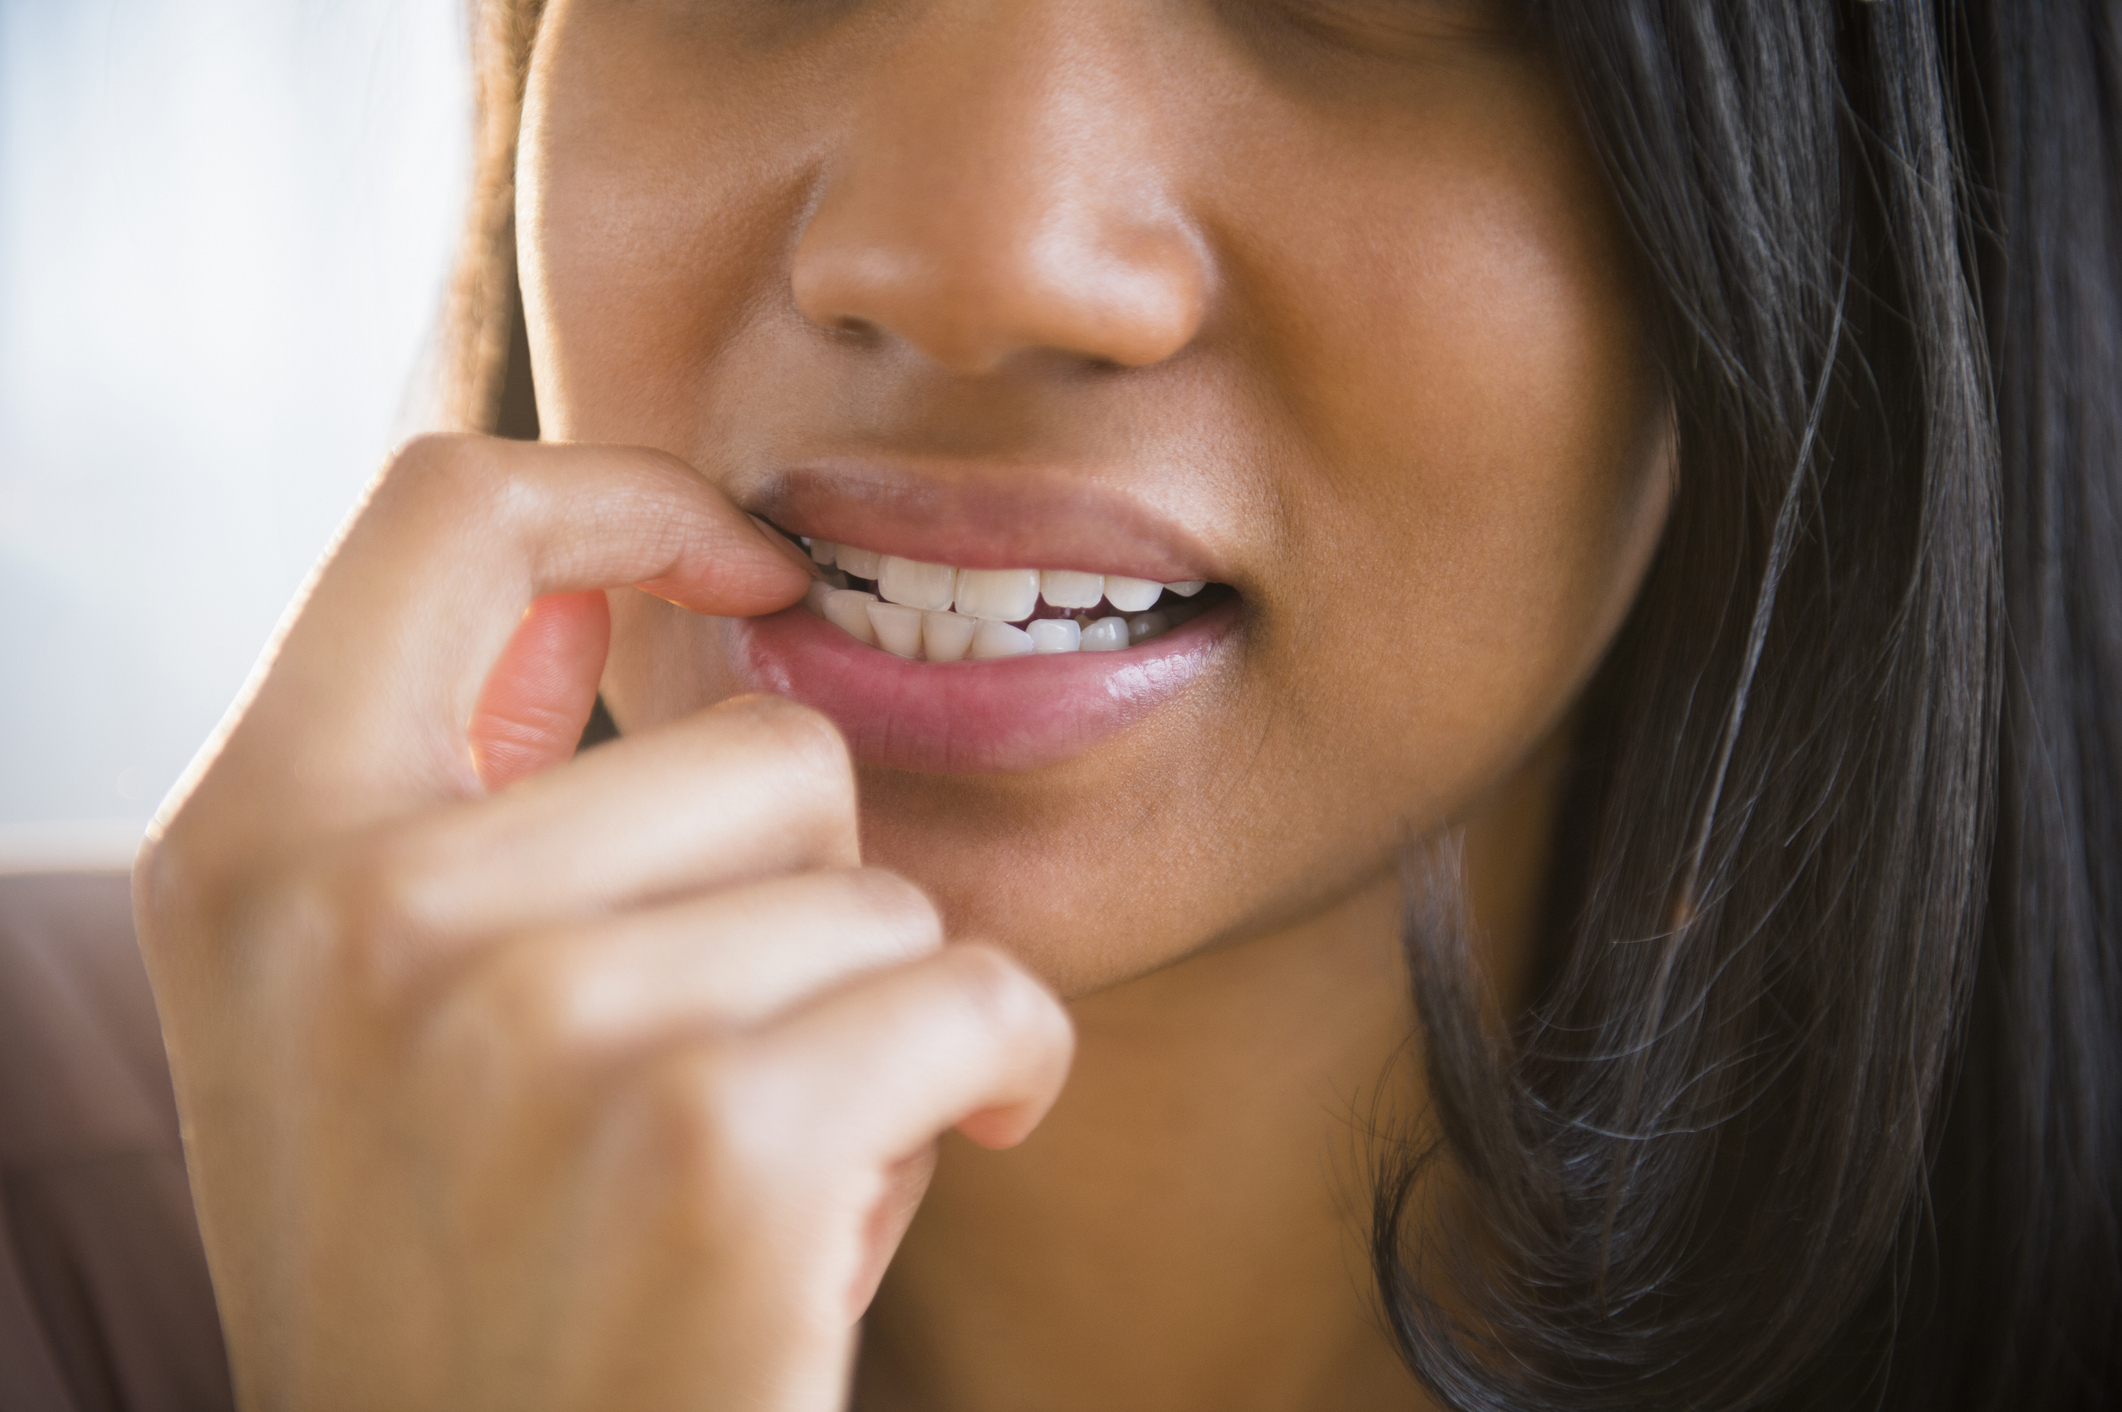 Close-up of a person biting their nails, partially covering their mouth with a hand, suggesting anxiety or nervousness